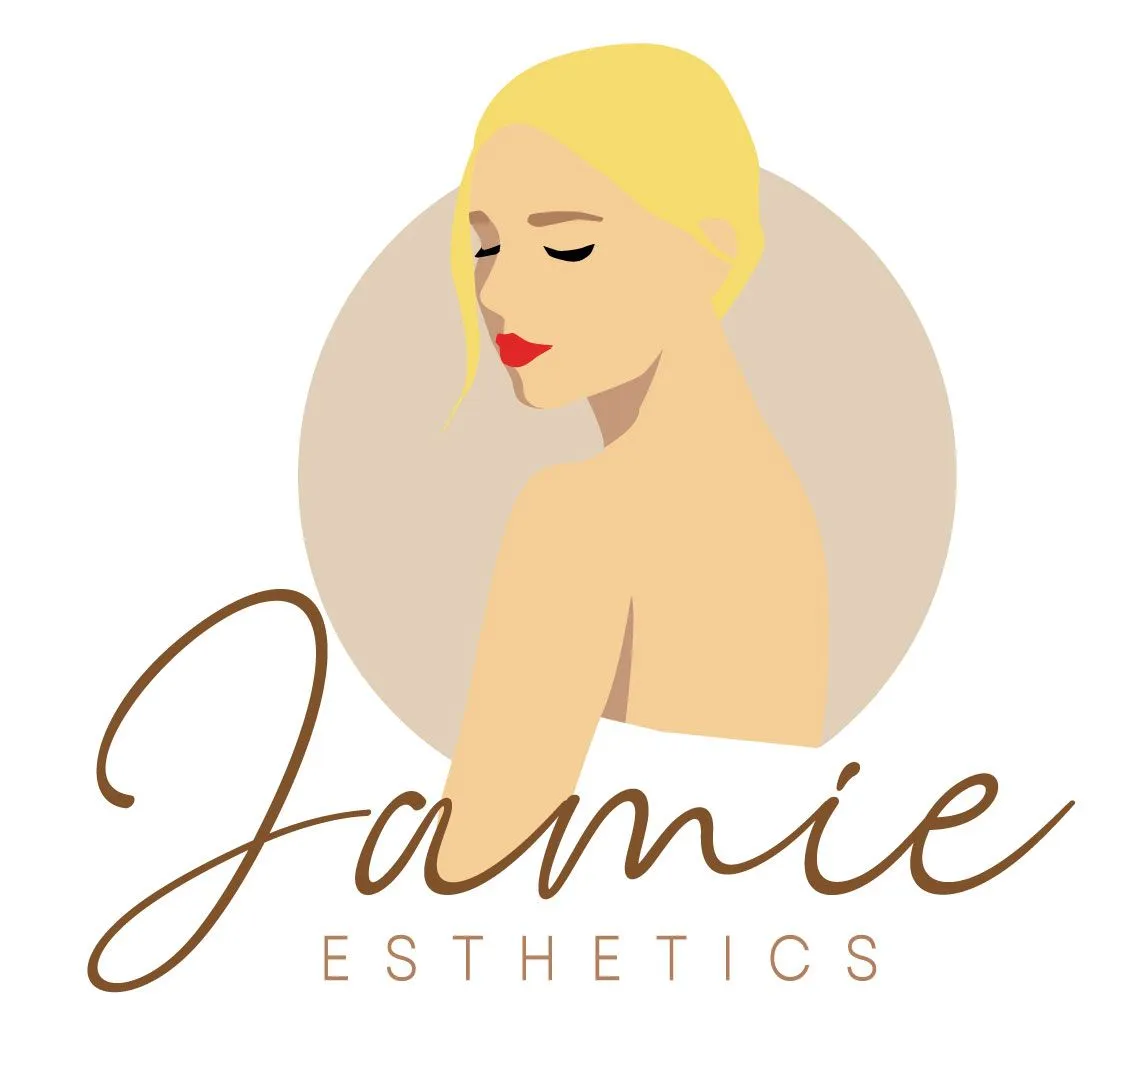 A logo for jamie esthetics shows a woman with her eyes closed